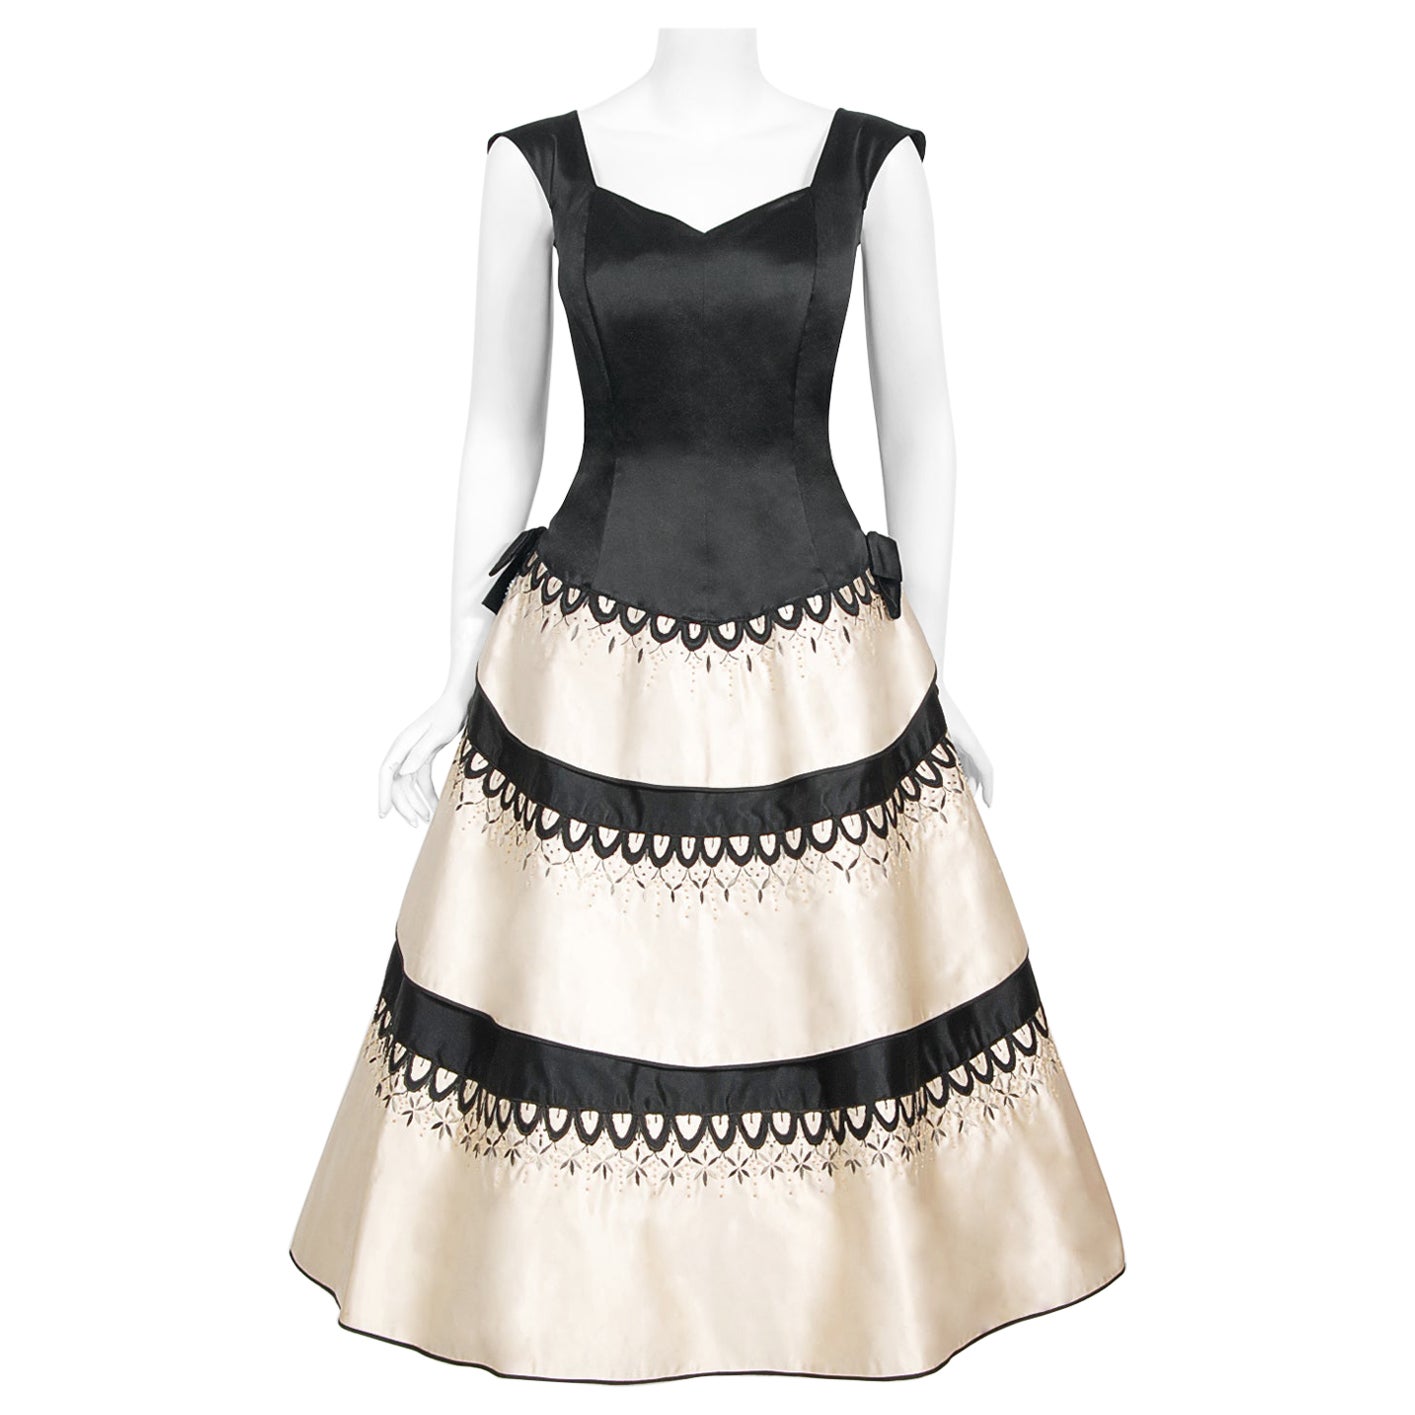 Vintage 1950's Emilio Schuberth Couture Black & Ivory Embroidered Satin Dress For Sale